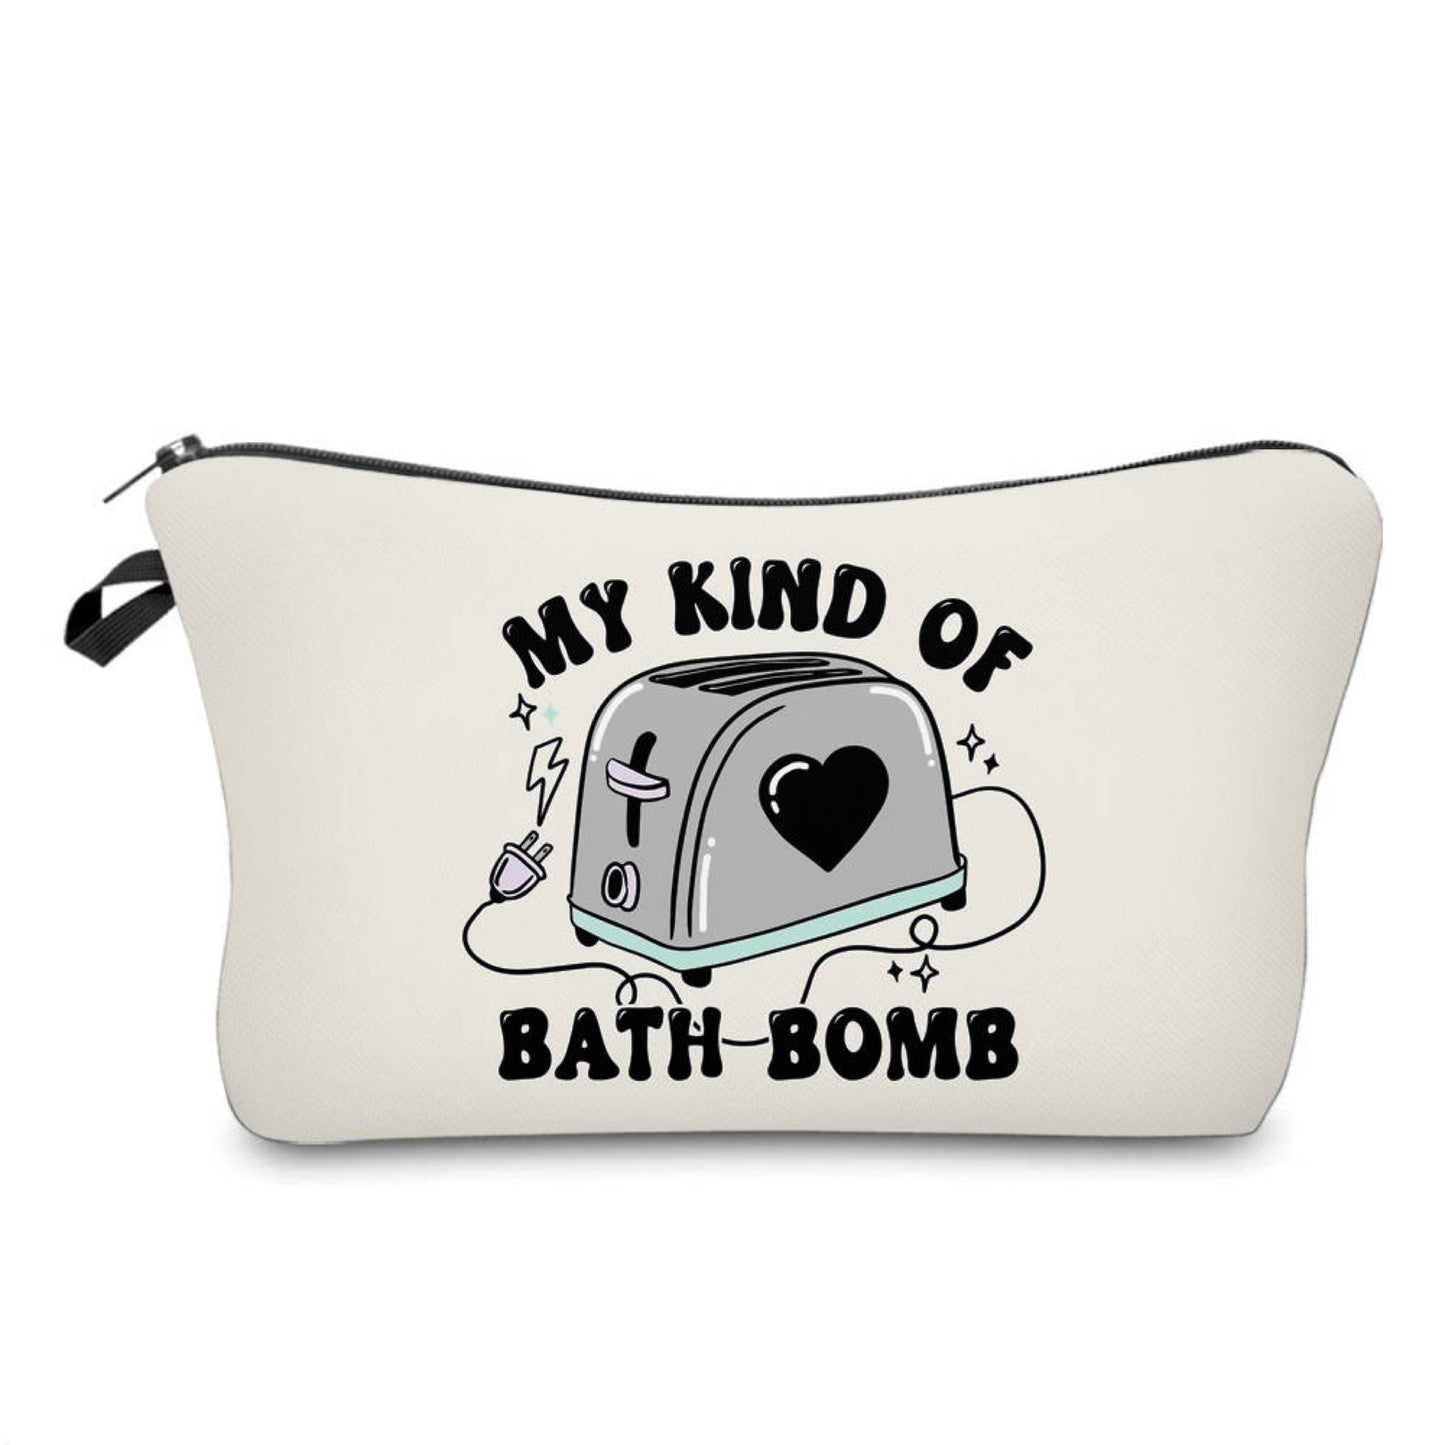 Toaster Bath Bomb - Water-Resistant Multi-Use Pouch